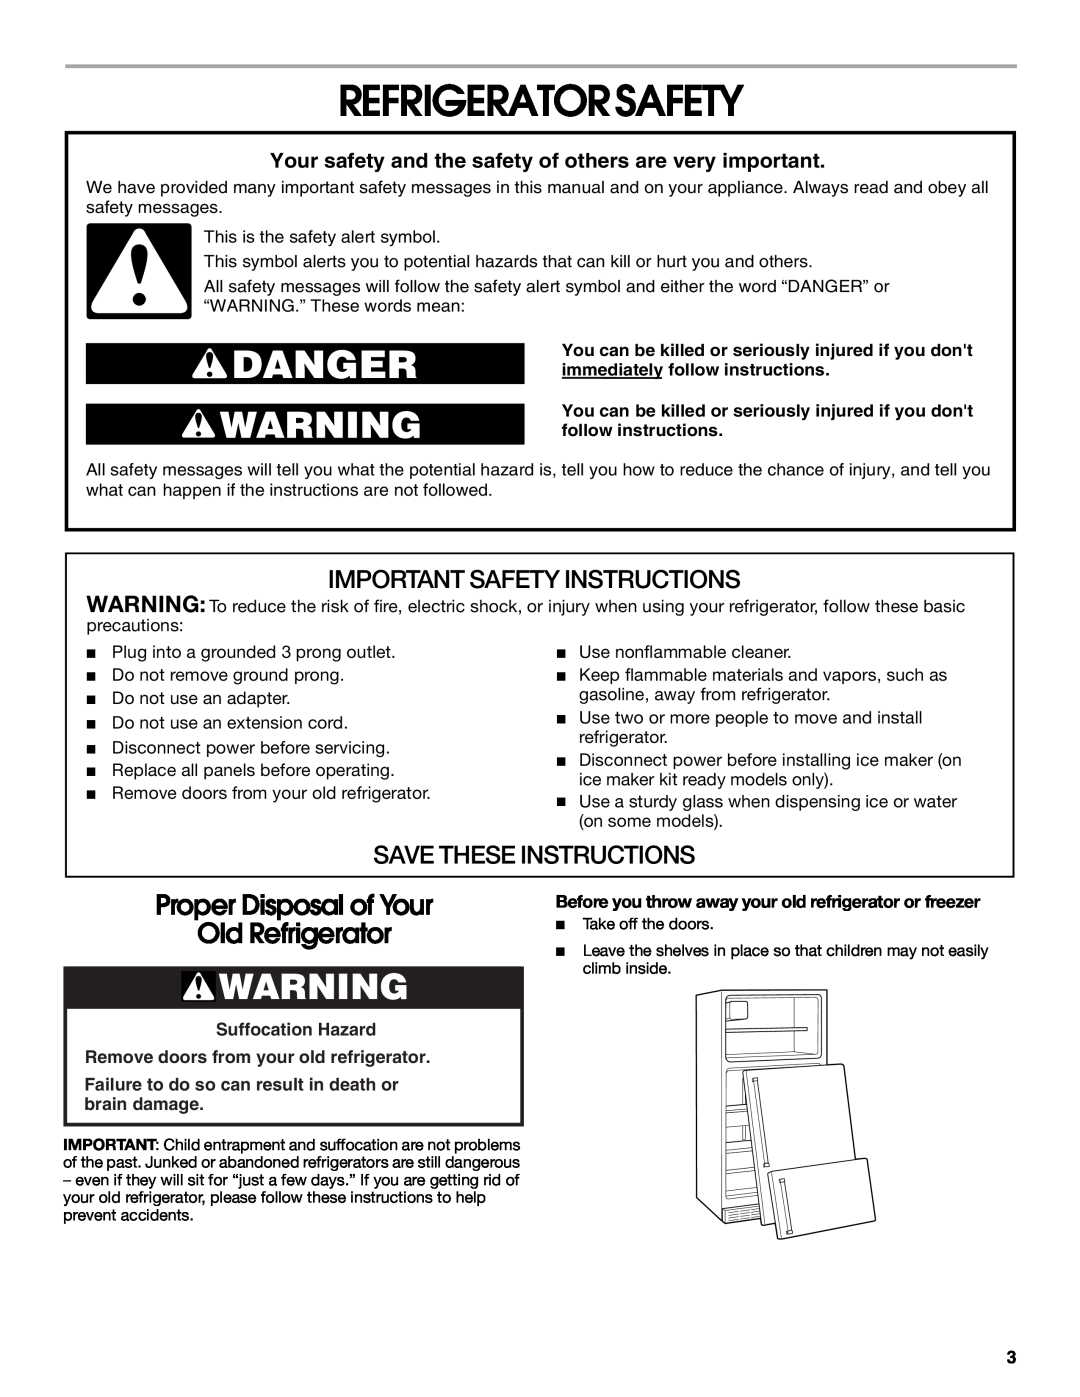 Whirlpool 2225405 Refrigeratorsafety, Suffocation Hazard Remove doors from your old refrigerator, Save These Instructions 